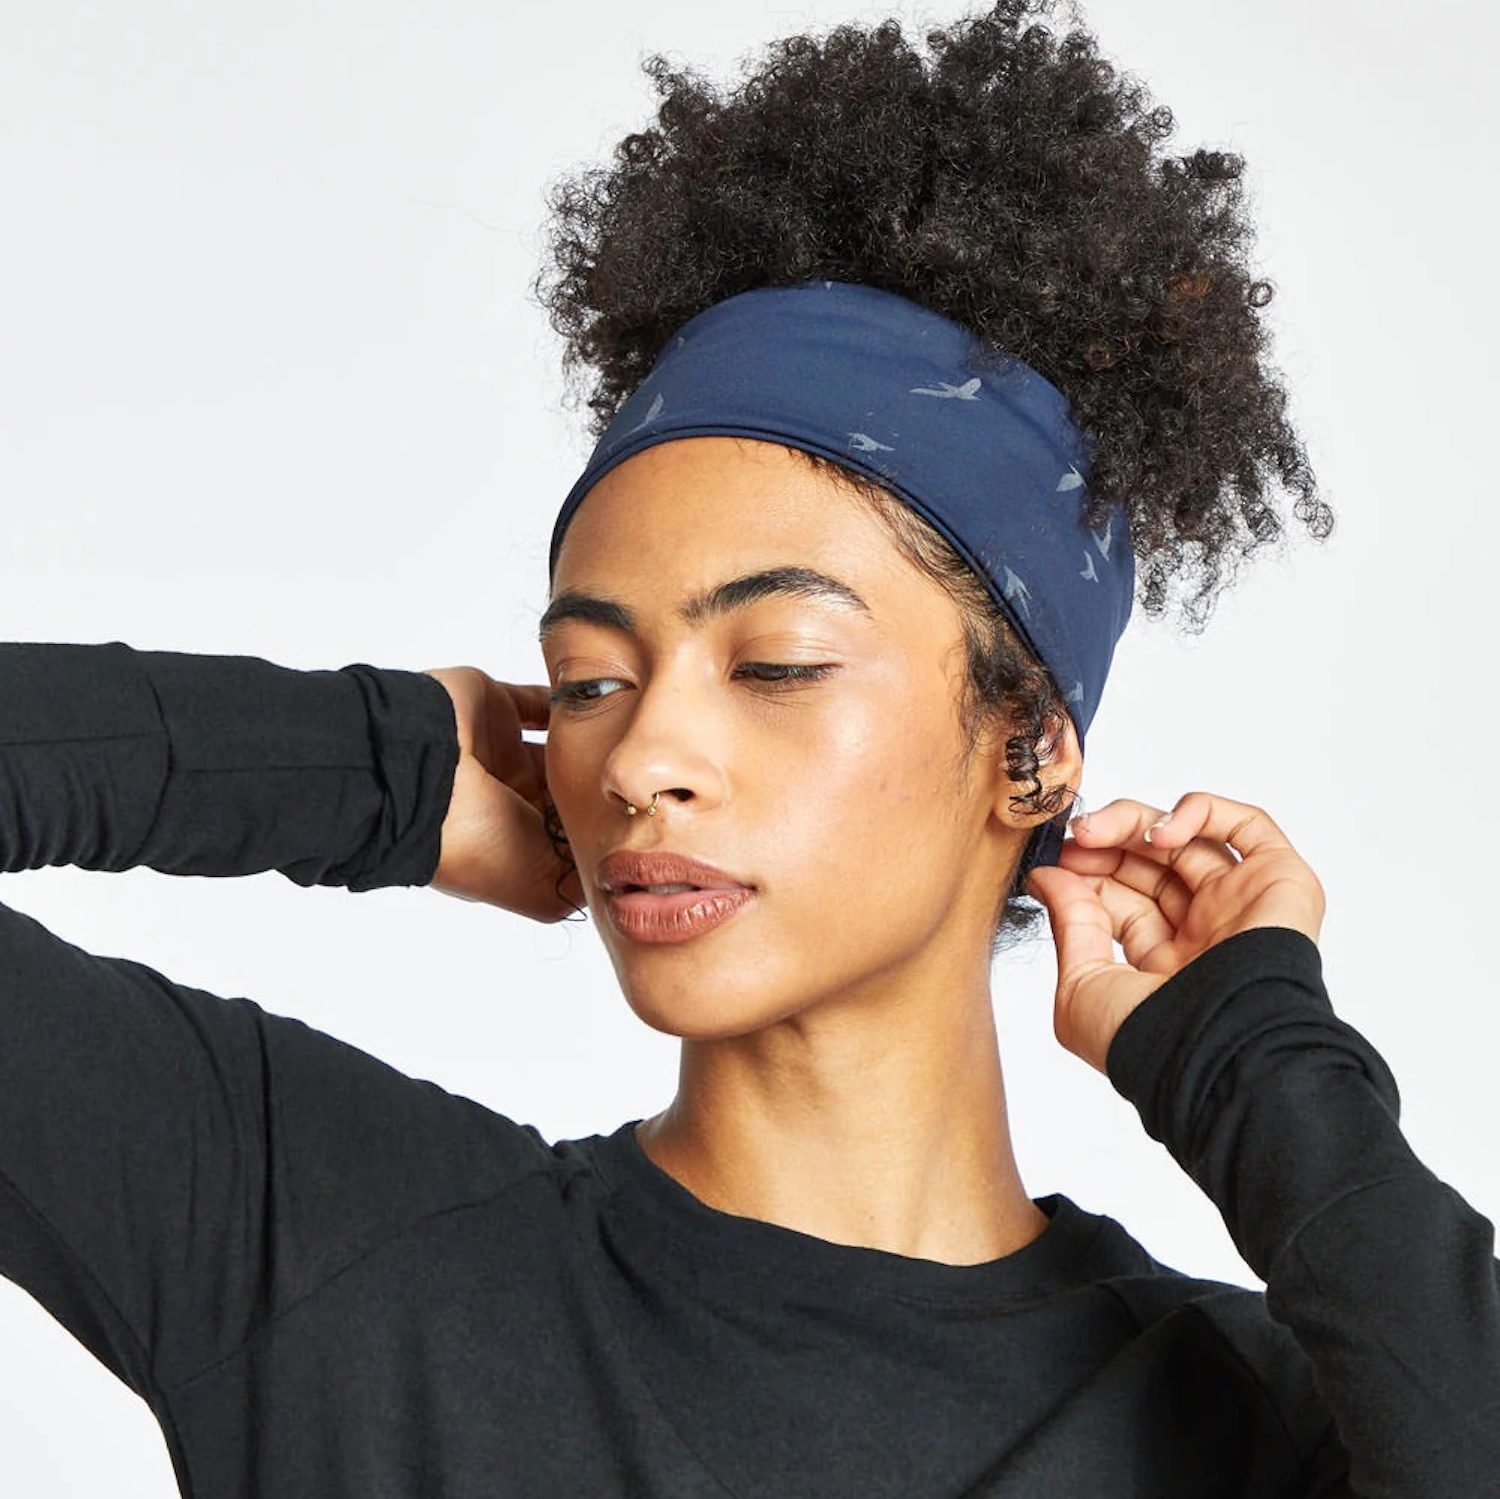 San Diego magazine holiday gift guide item Firecracker earband from Oiselle